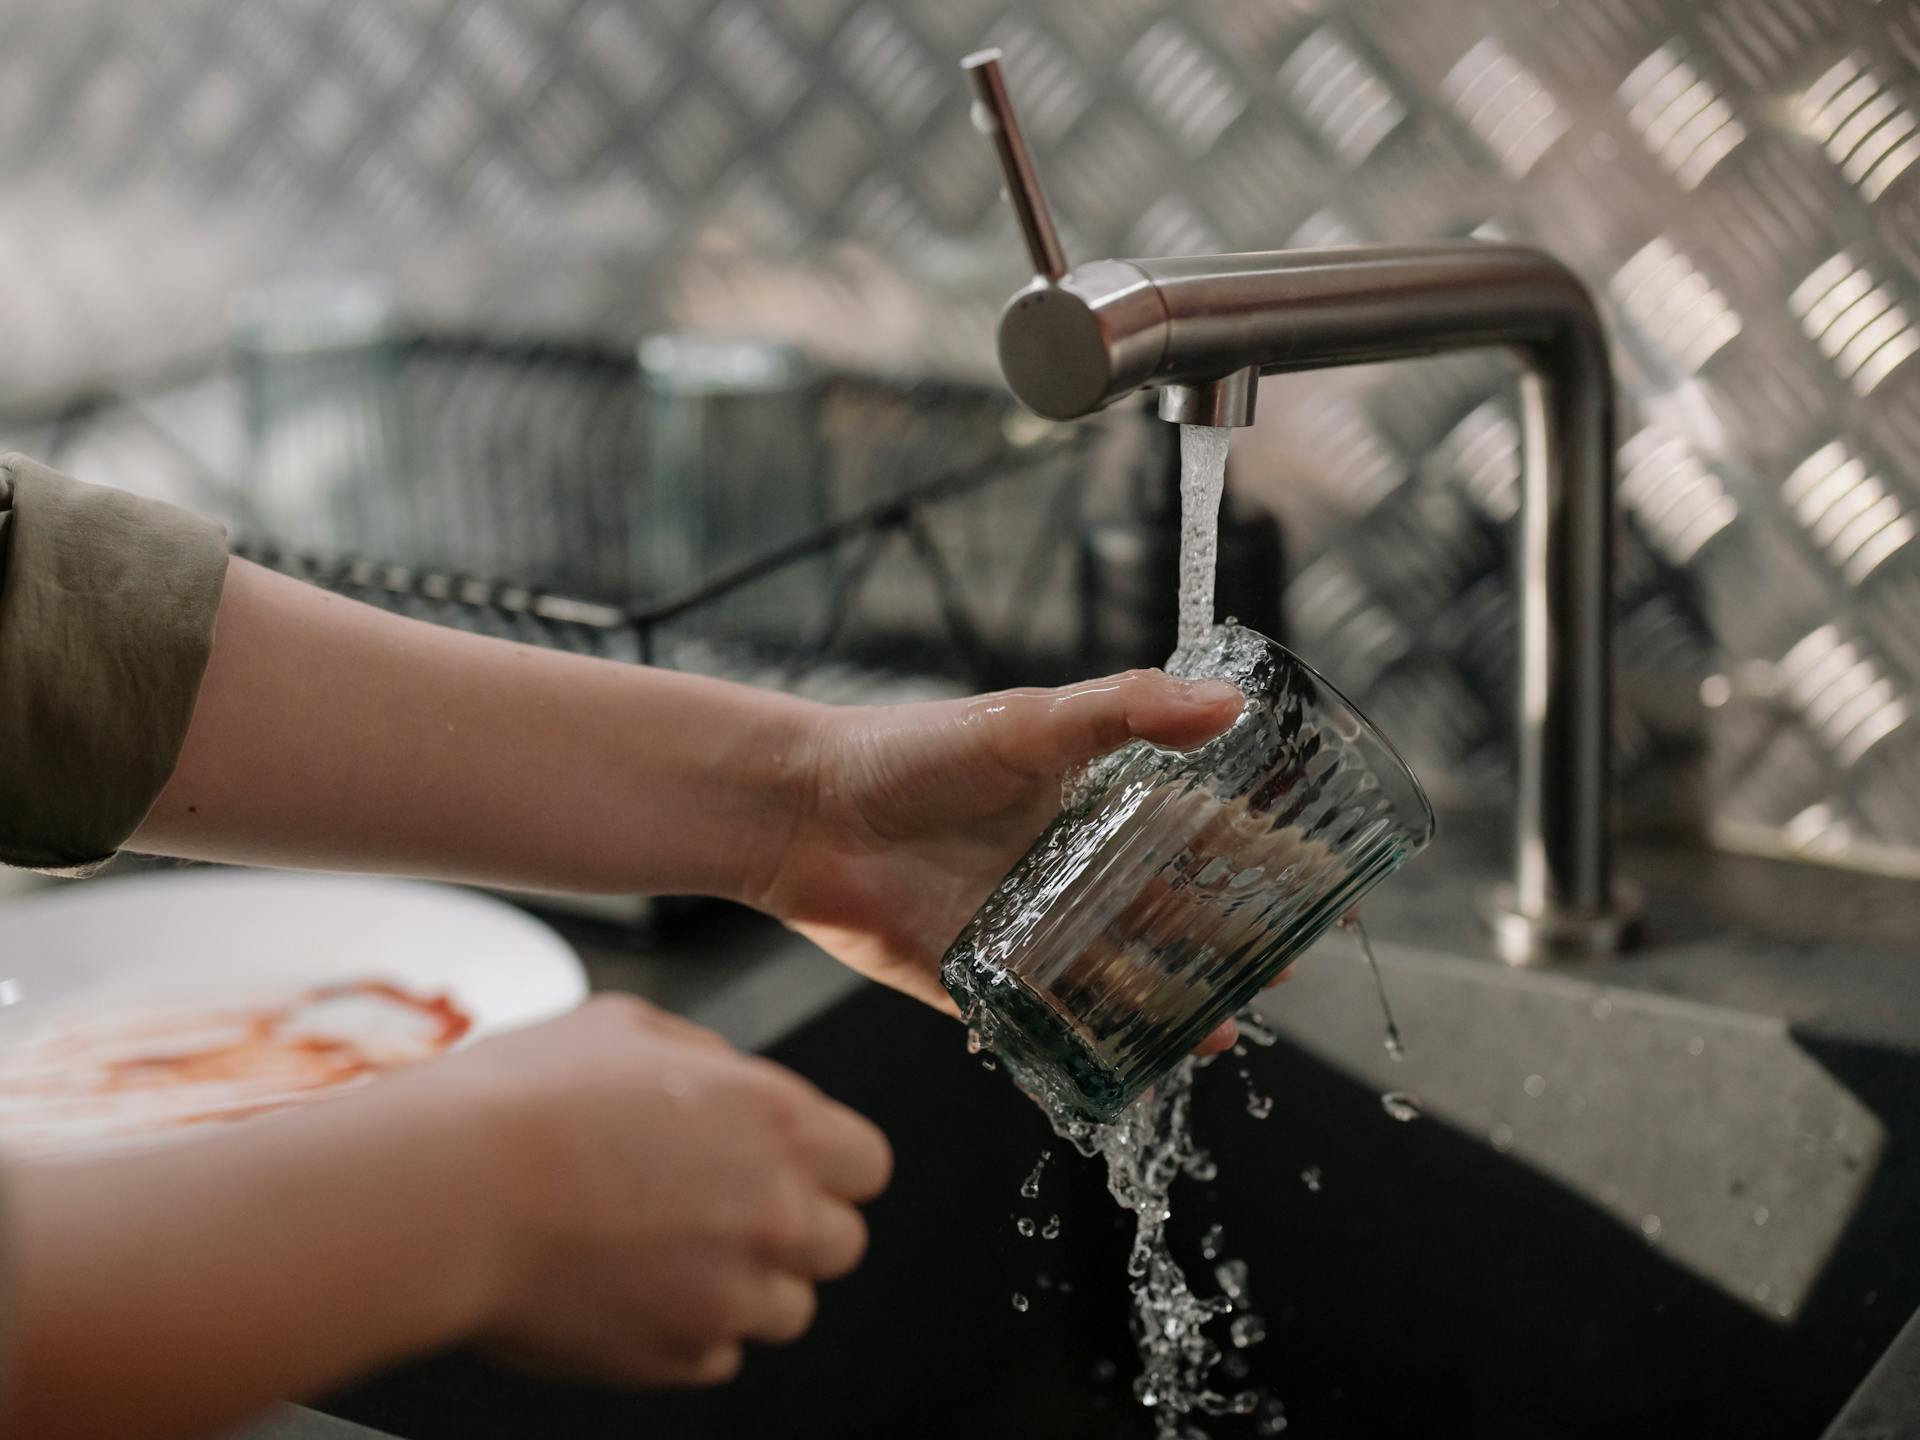 A person doing the dishes | Source: Pexels